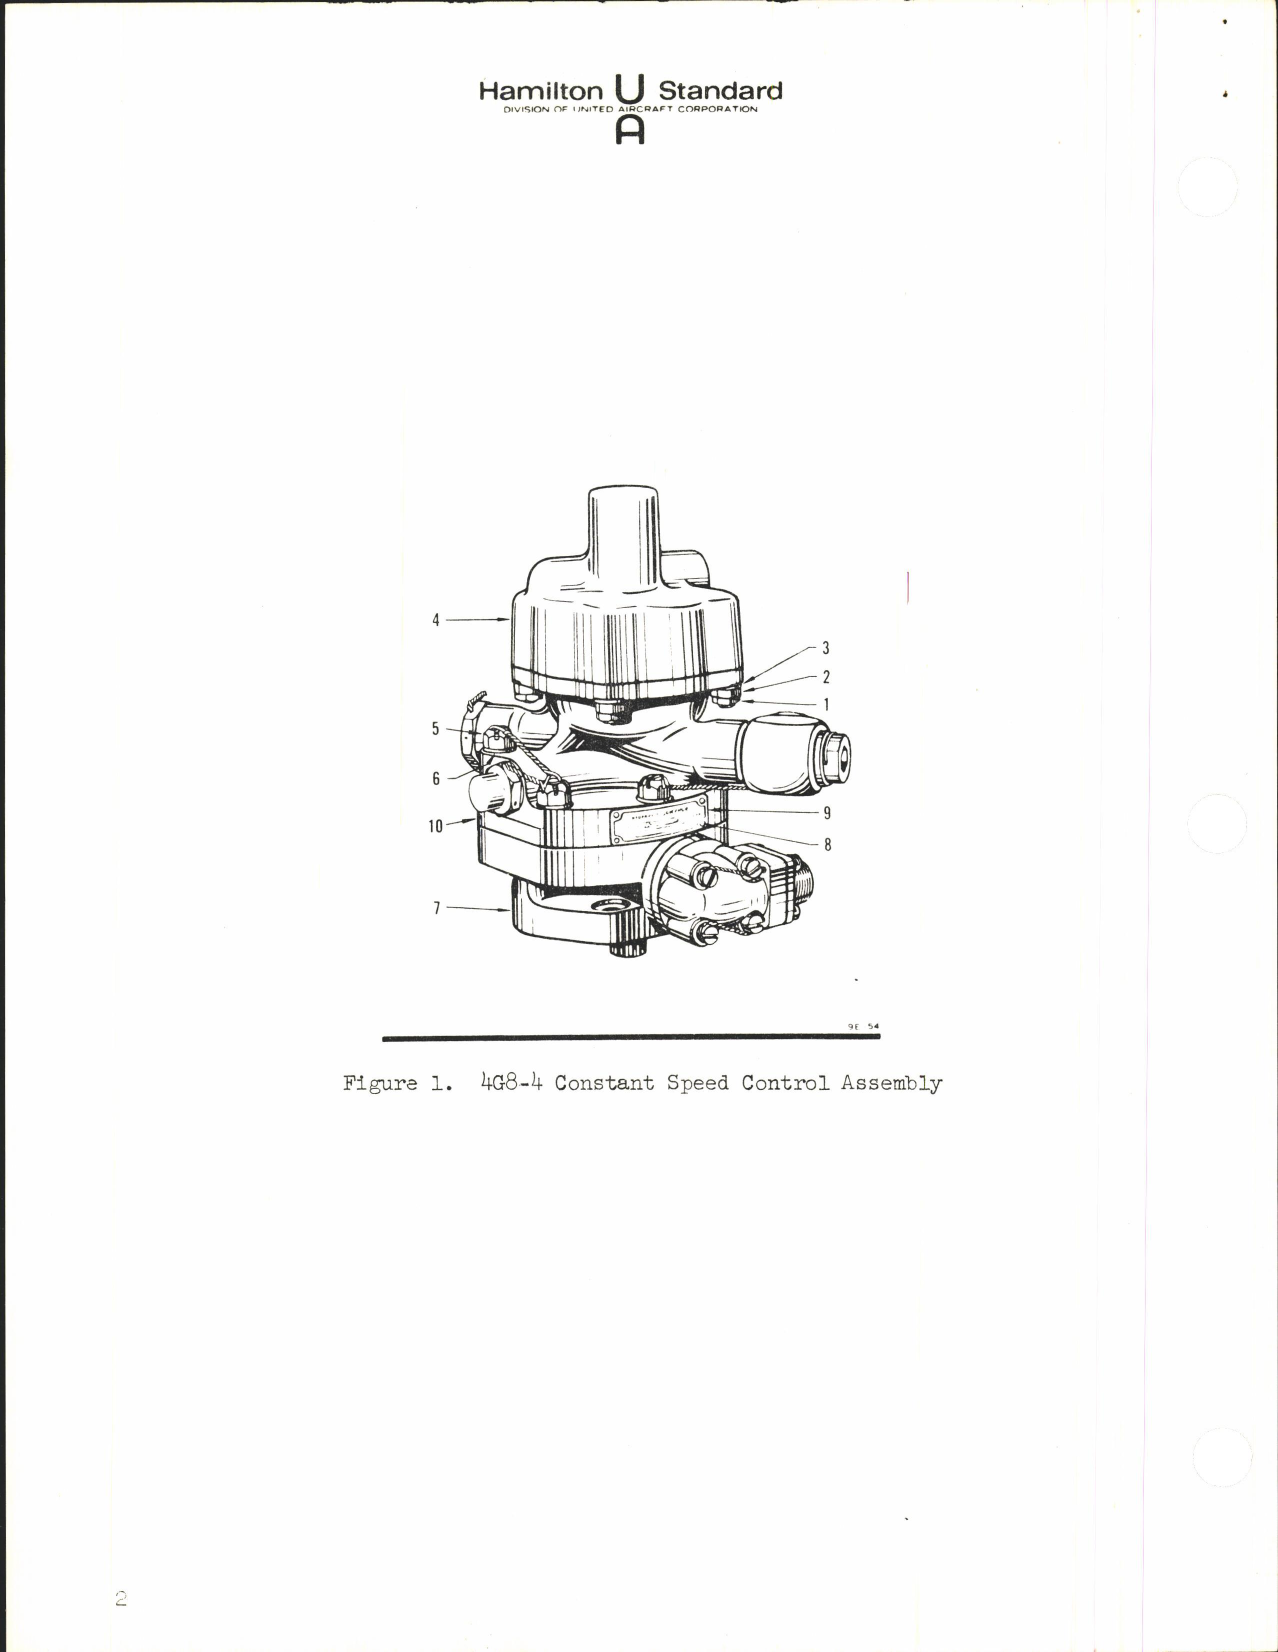 Sample page 4 from AirCorps Library document: Parts Catalog for Model 4G8-4 Control Assembly